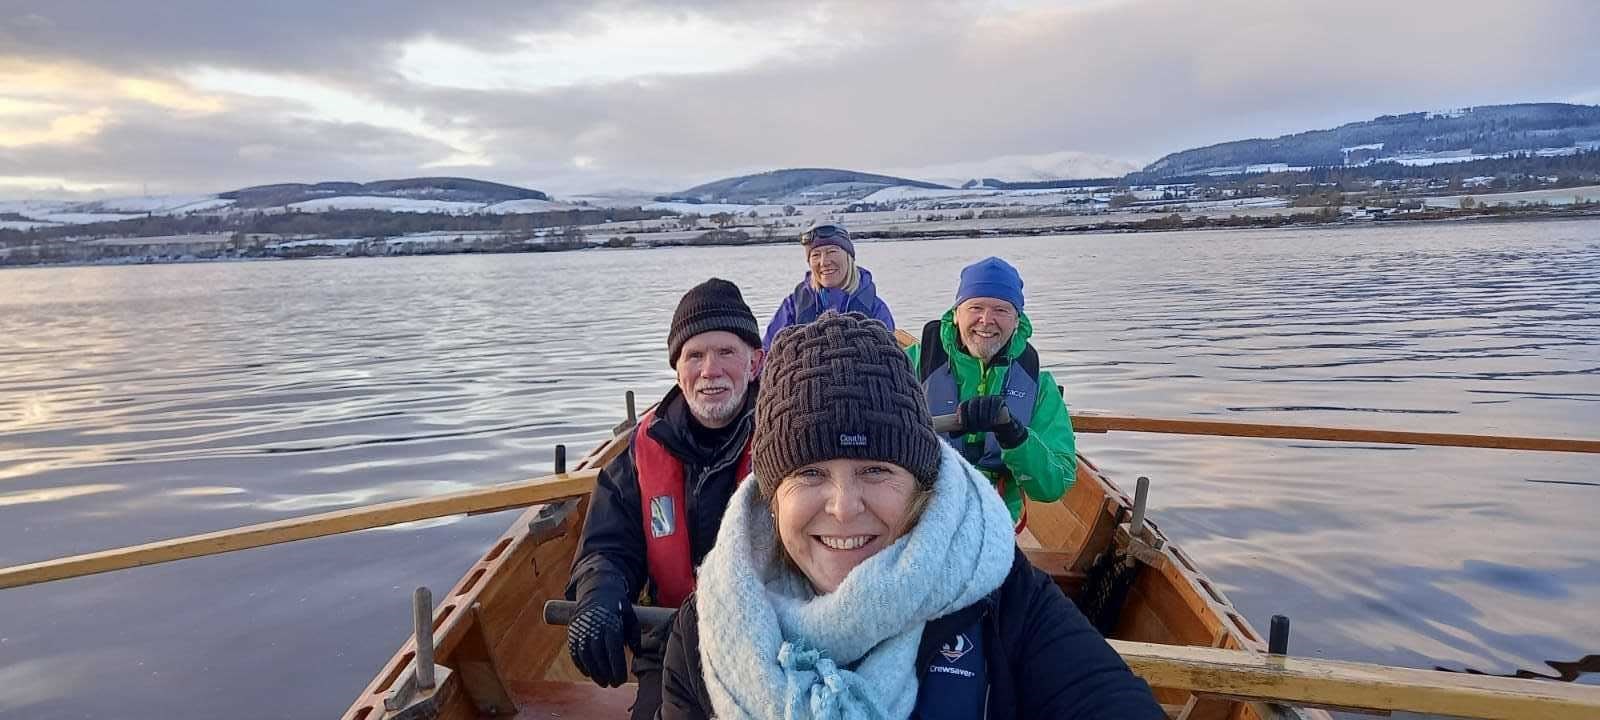 Rowers (left to right) Allan Mackenzie, Wendy Bramley, Barry Bramley and Hazel Inglis on the Cromarty Firth.